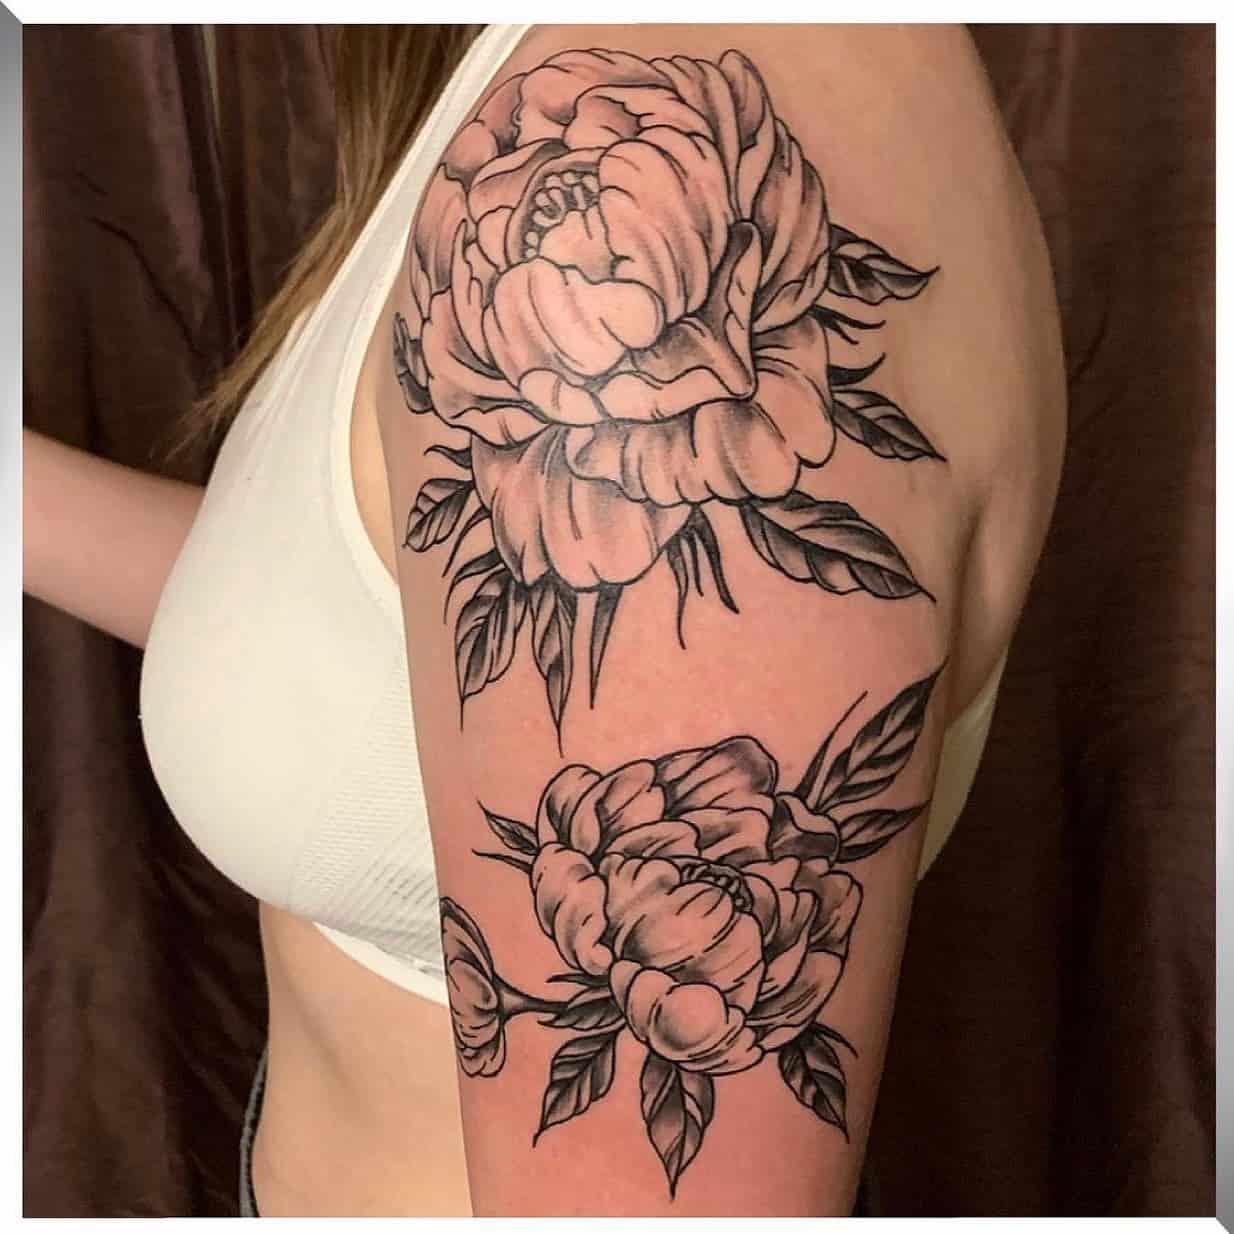 30 Awesome Forearm Tattoo Designs  For Creative Juice  Rose tattoo on arm  Tattoos for women half sleeve Rose tattoo sleeve